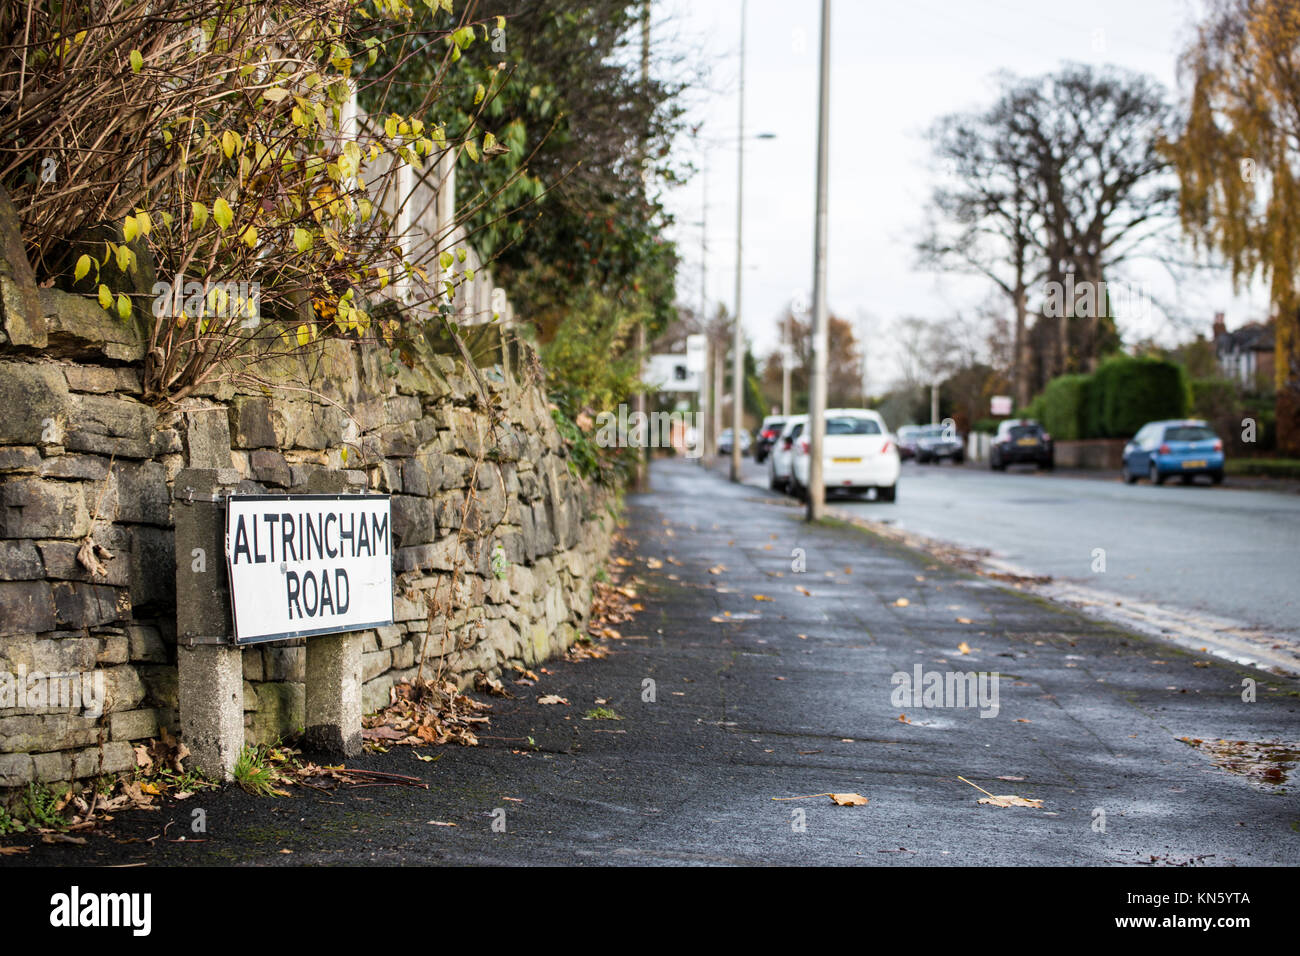 Altrincham Road street sign in Gatley, Greater Manchester, Angleterre, RU prise le 25-Nov-2017 Banque D'Images